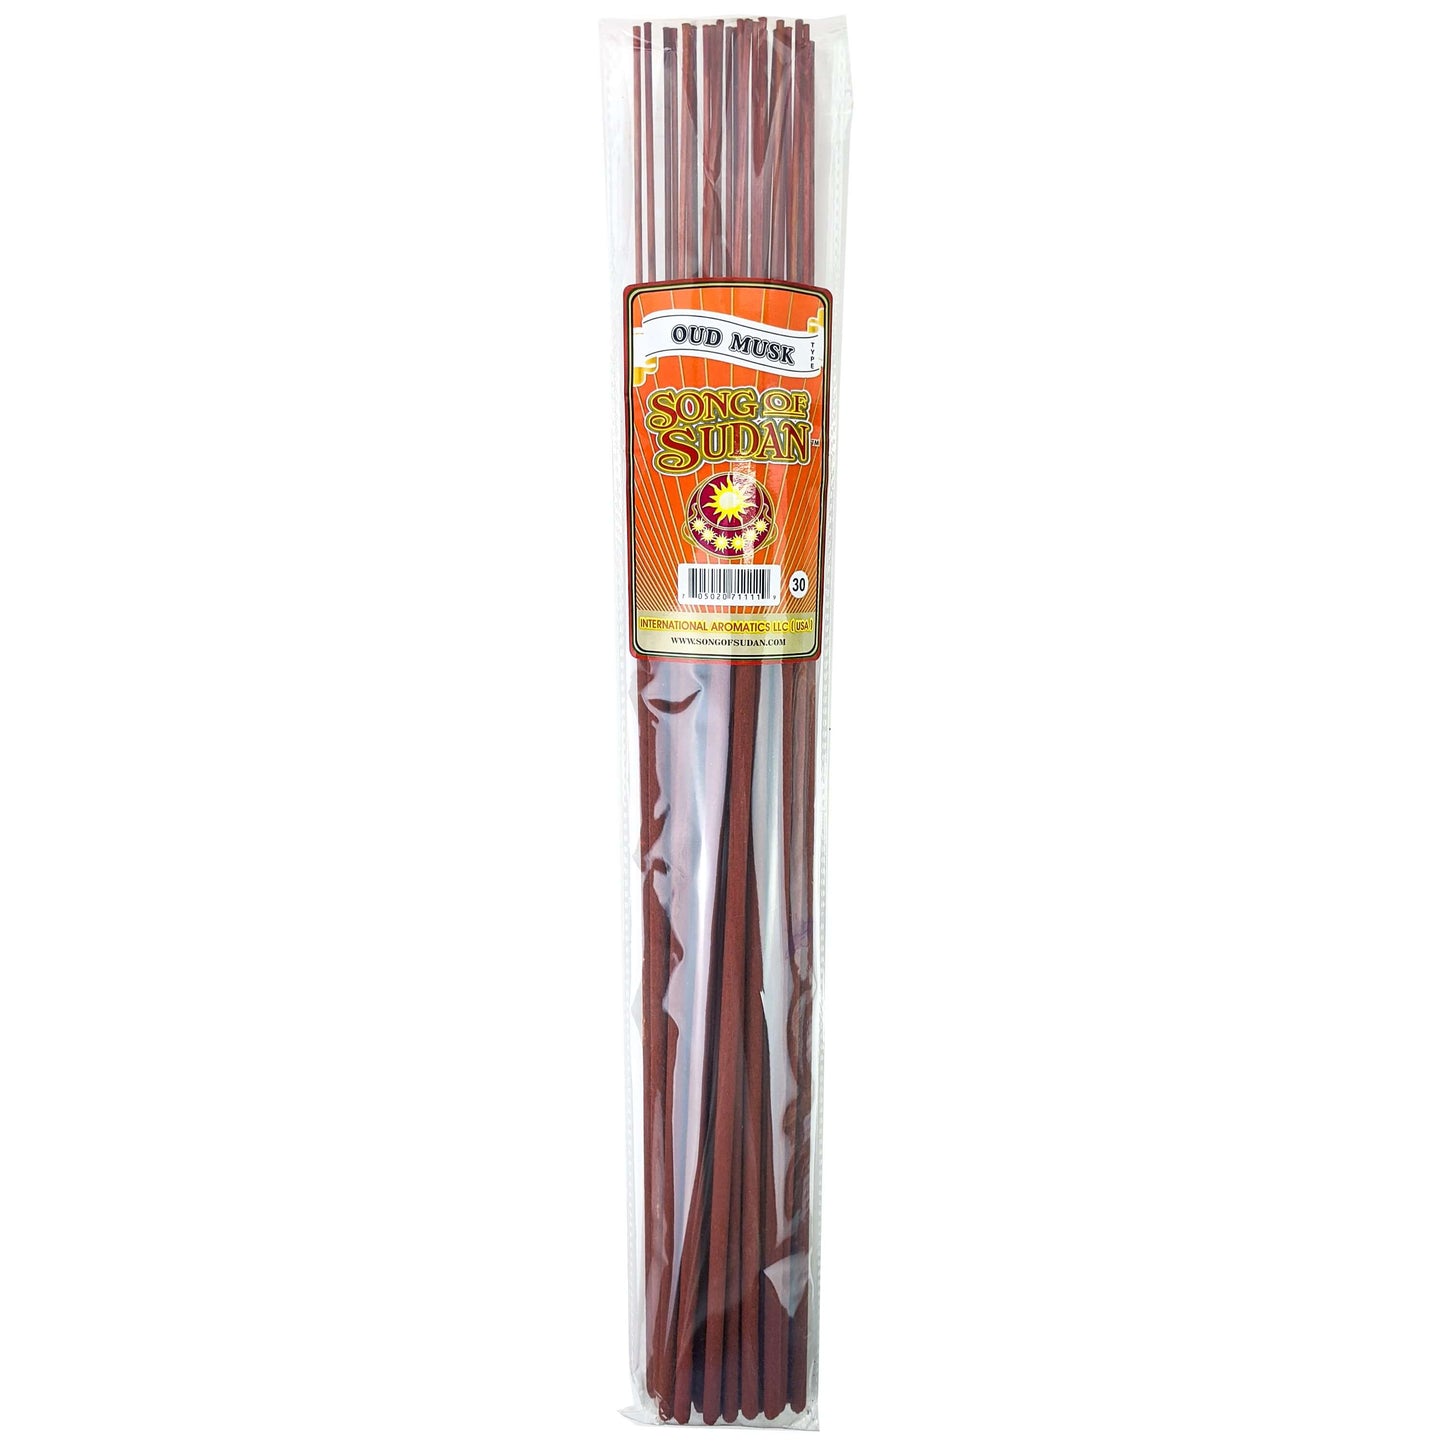 Oud Musk Type Scent, Song Of Sudan 19" Jumbo Incense